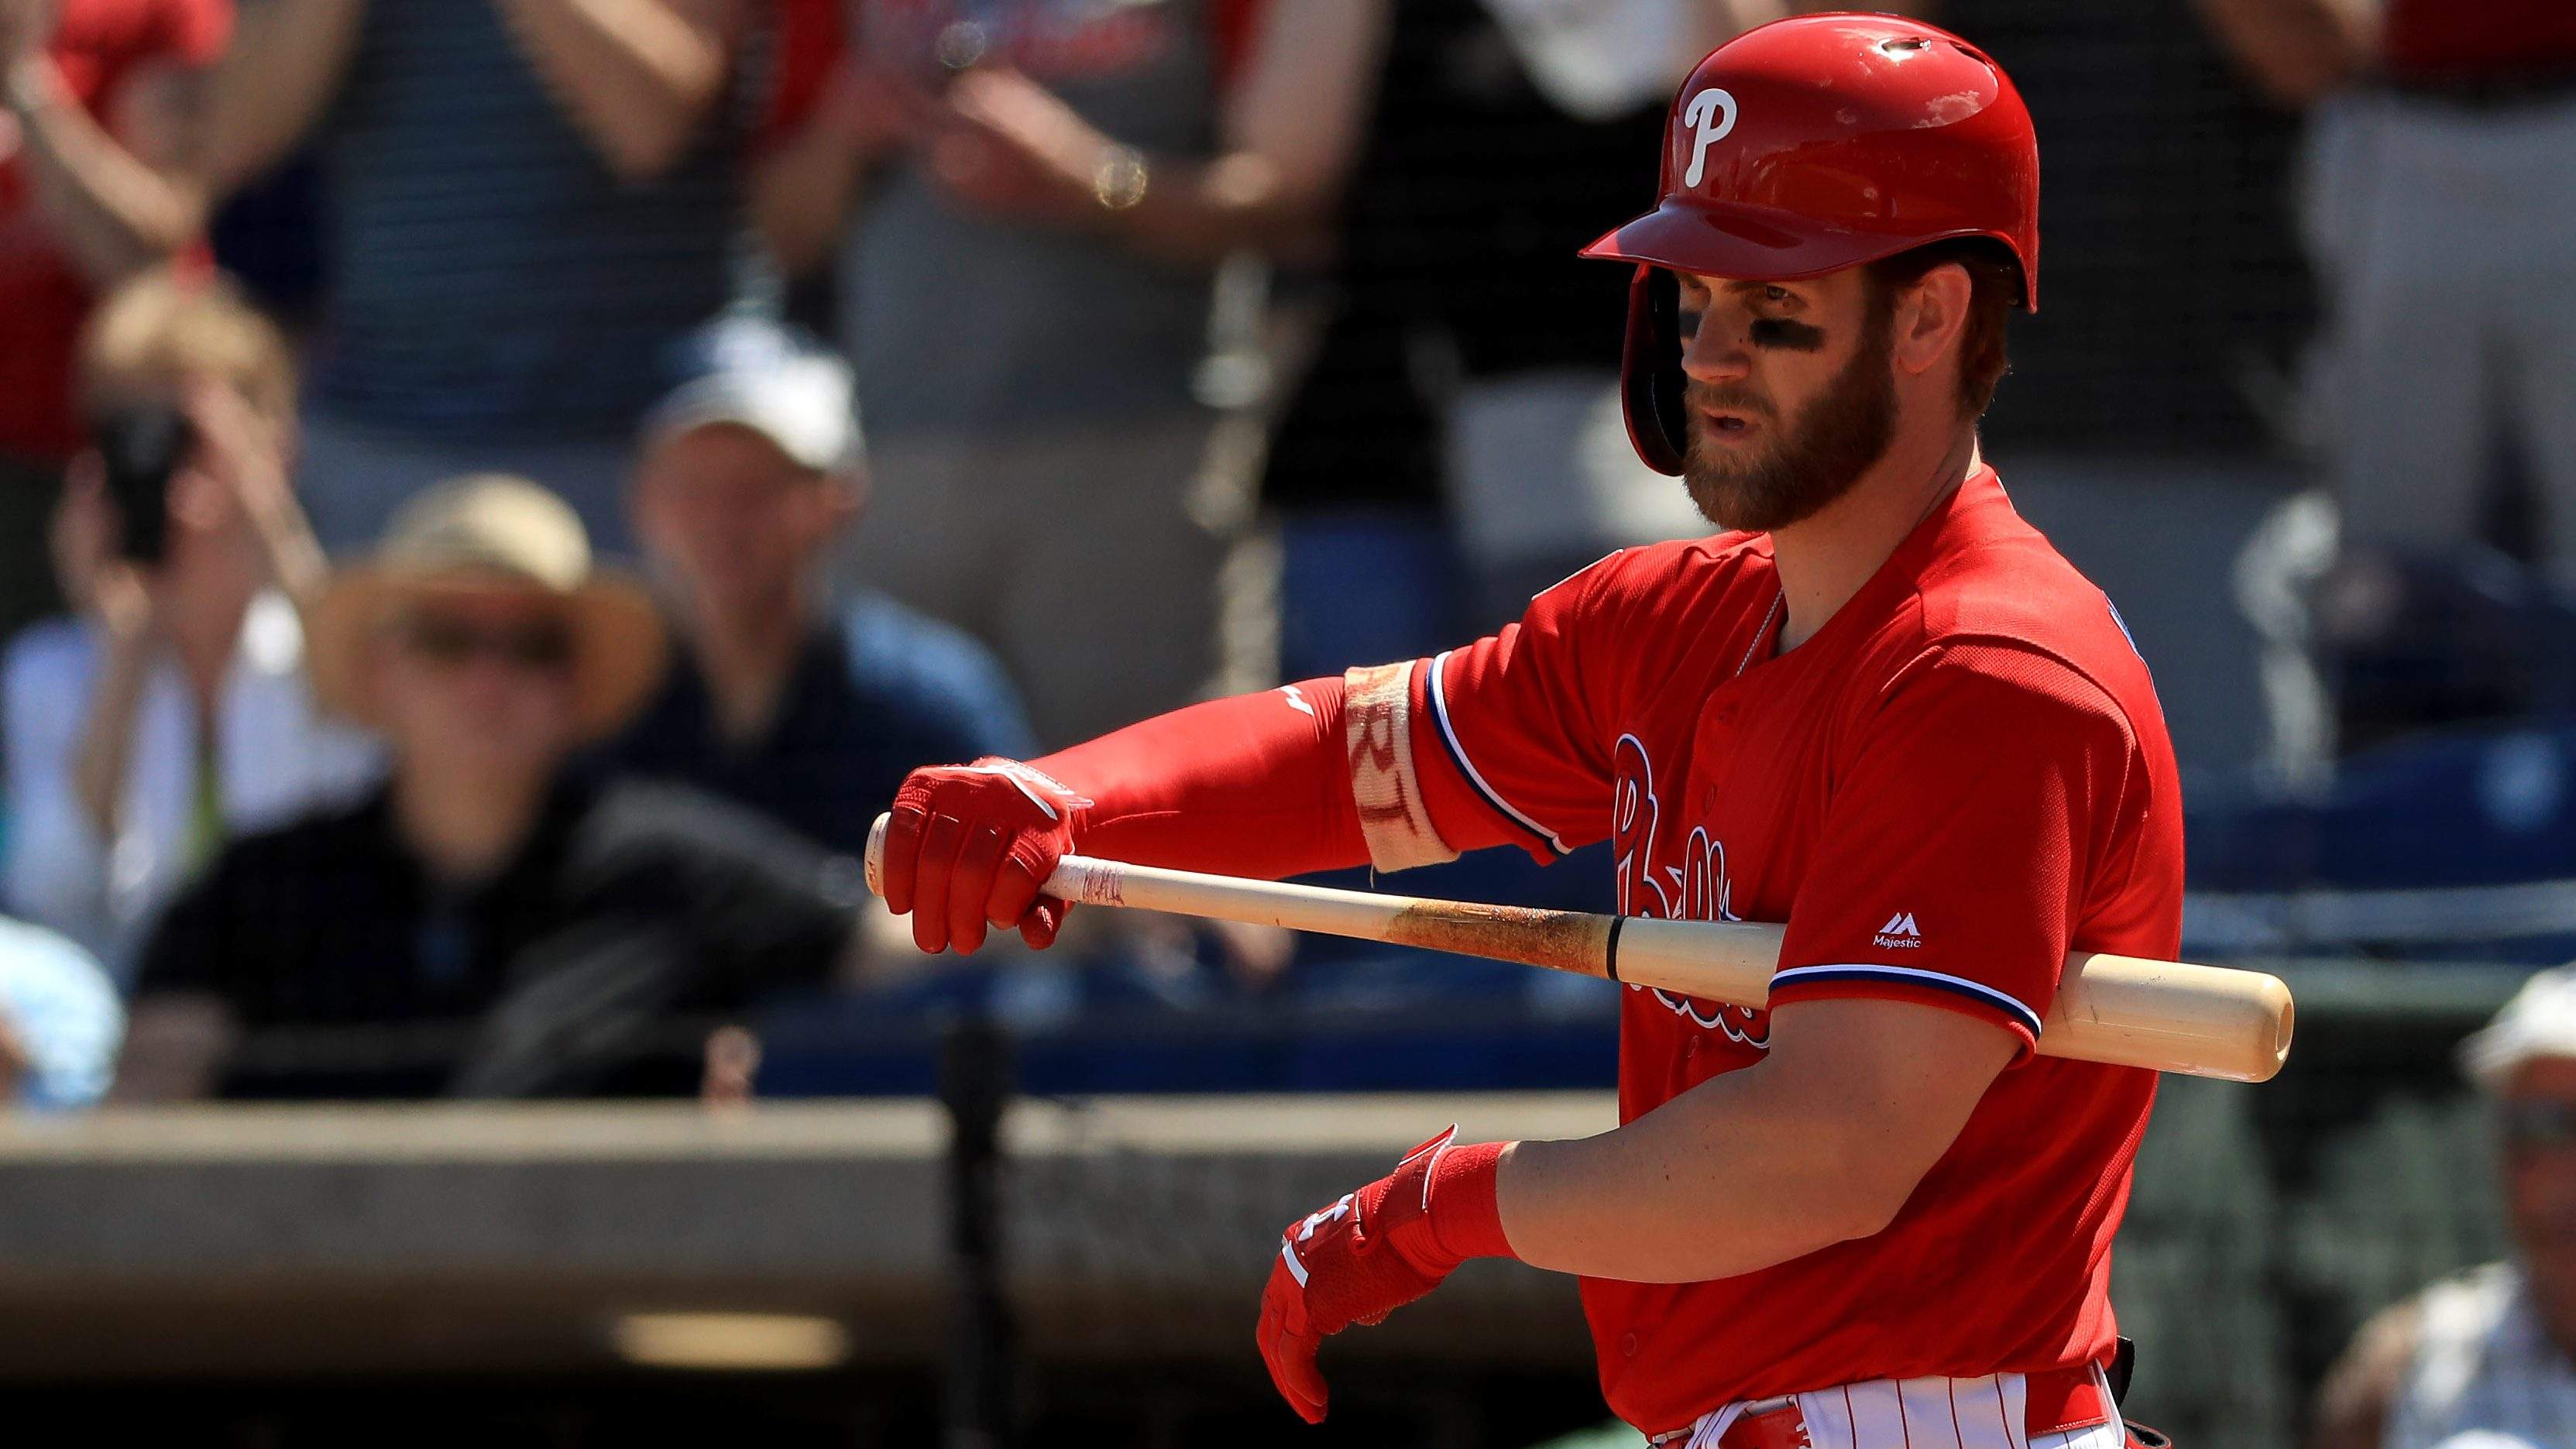 Phillies’ $330M star Bryce Harper limps off field, plunked by pitch amid spring preparing diversion